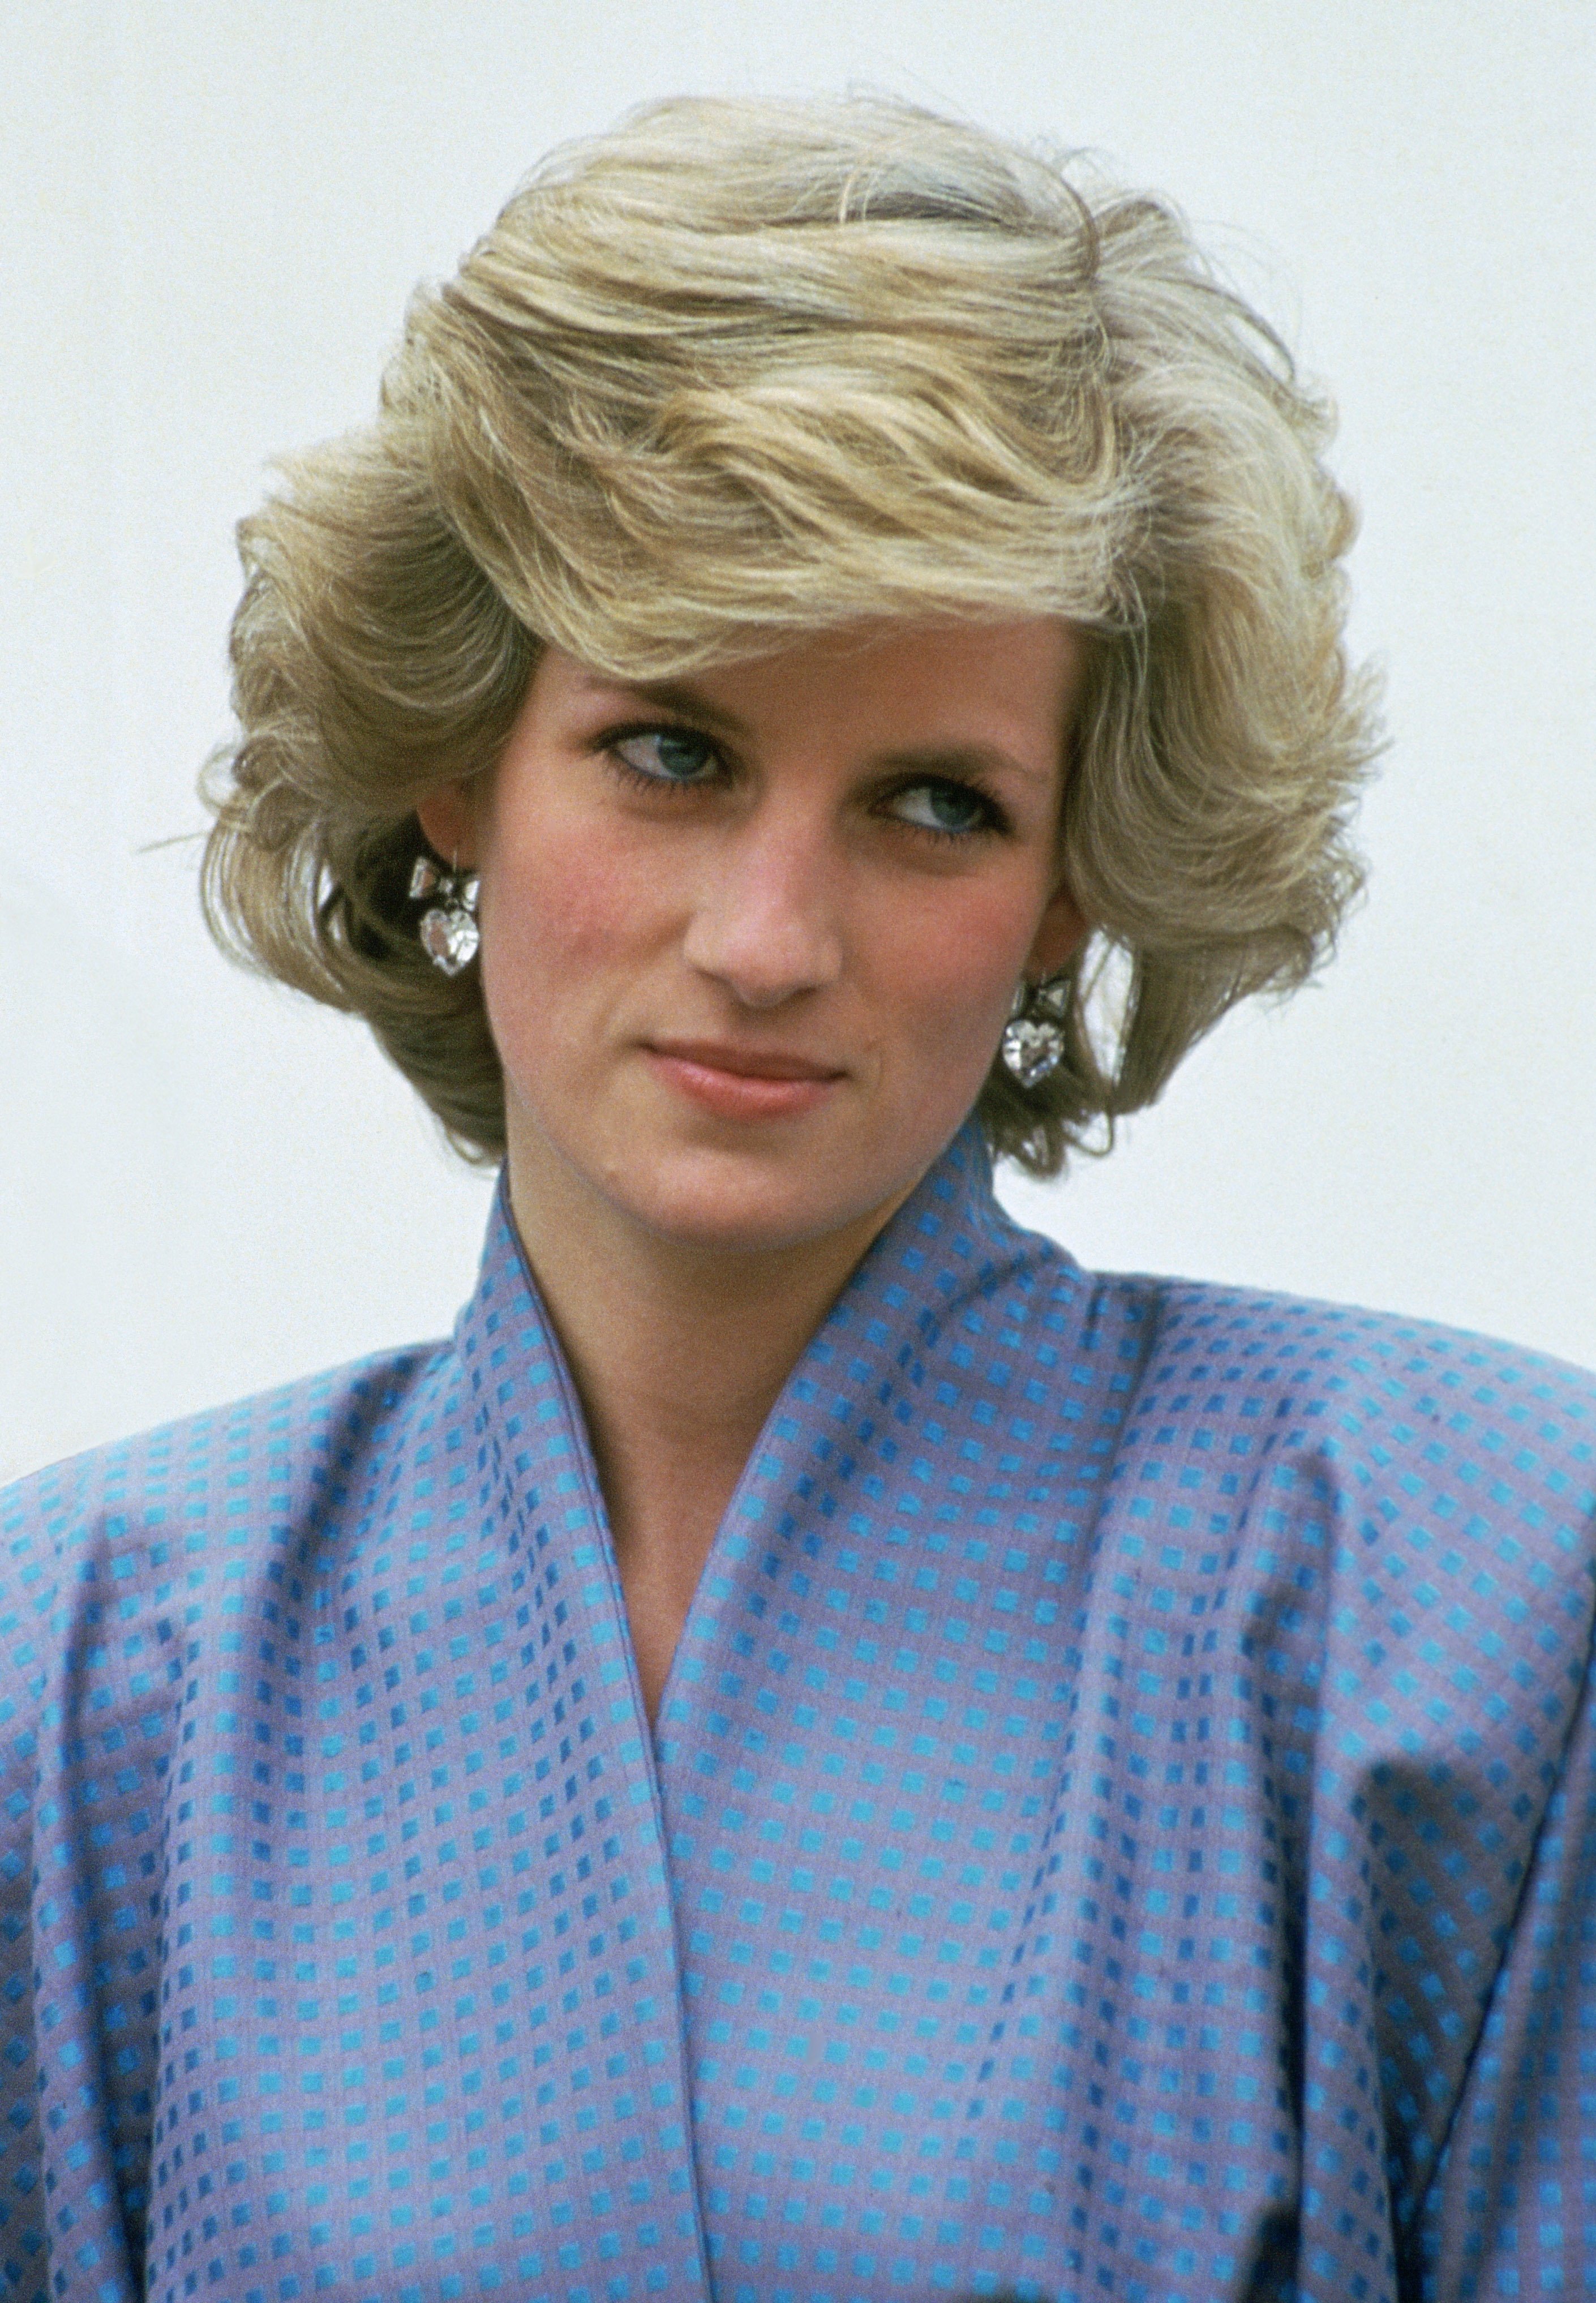 Princess Diana photographed in Italy during an official overseas visit. | Source: Getty Images